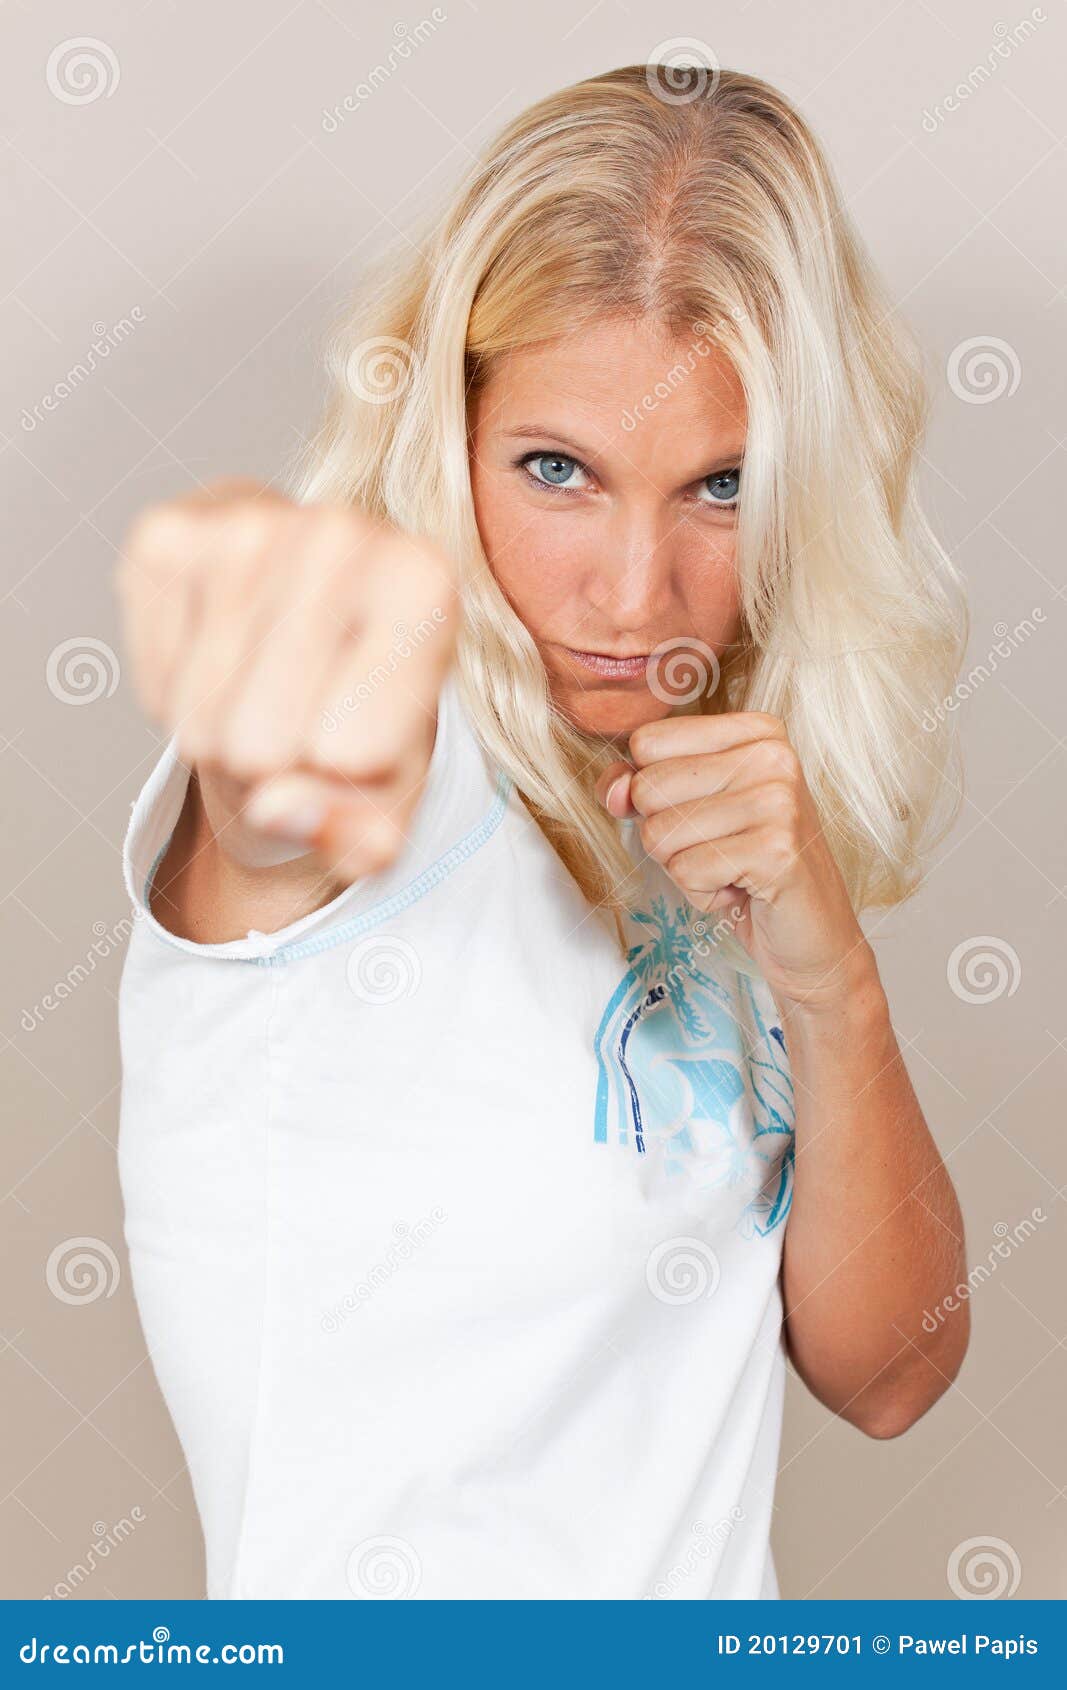 Young Attractive Woman Attacks With A Punch Stock Image - Image of